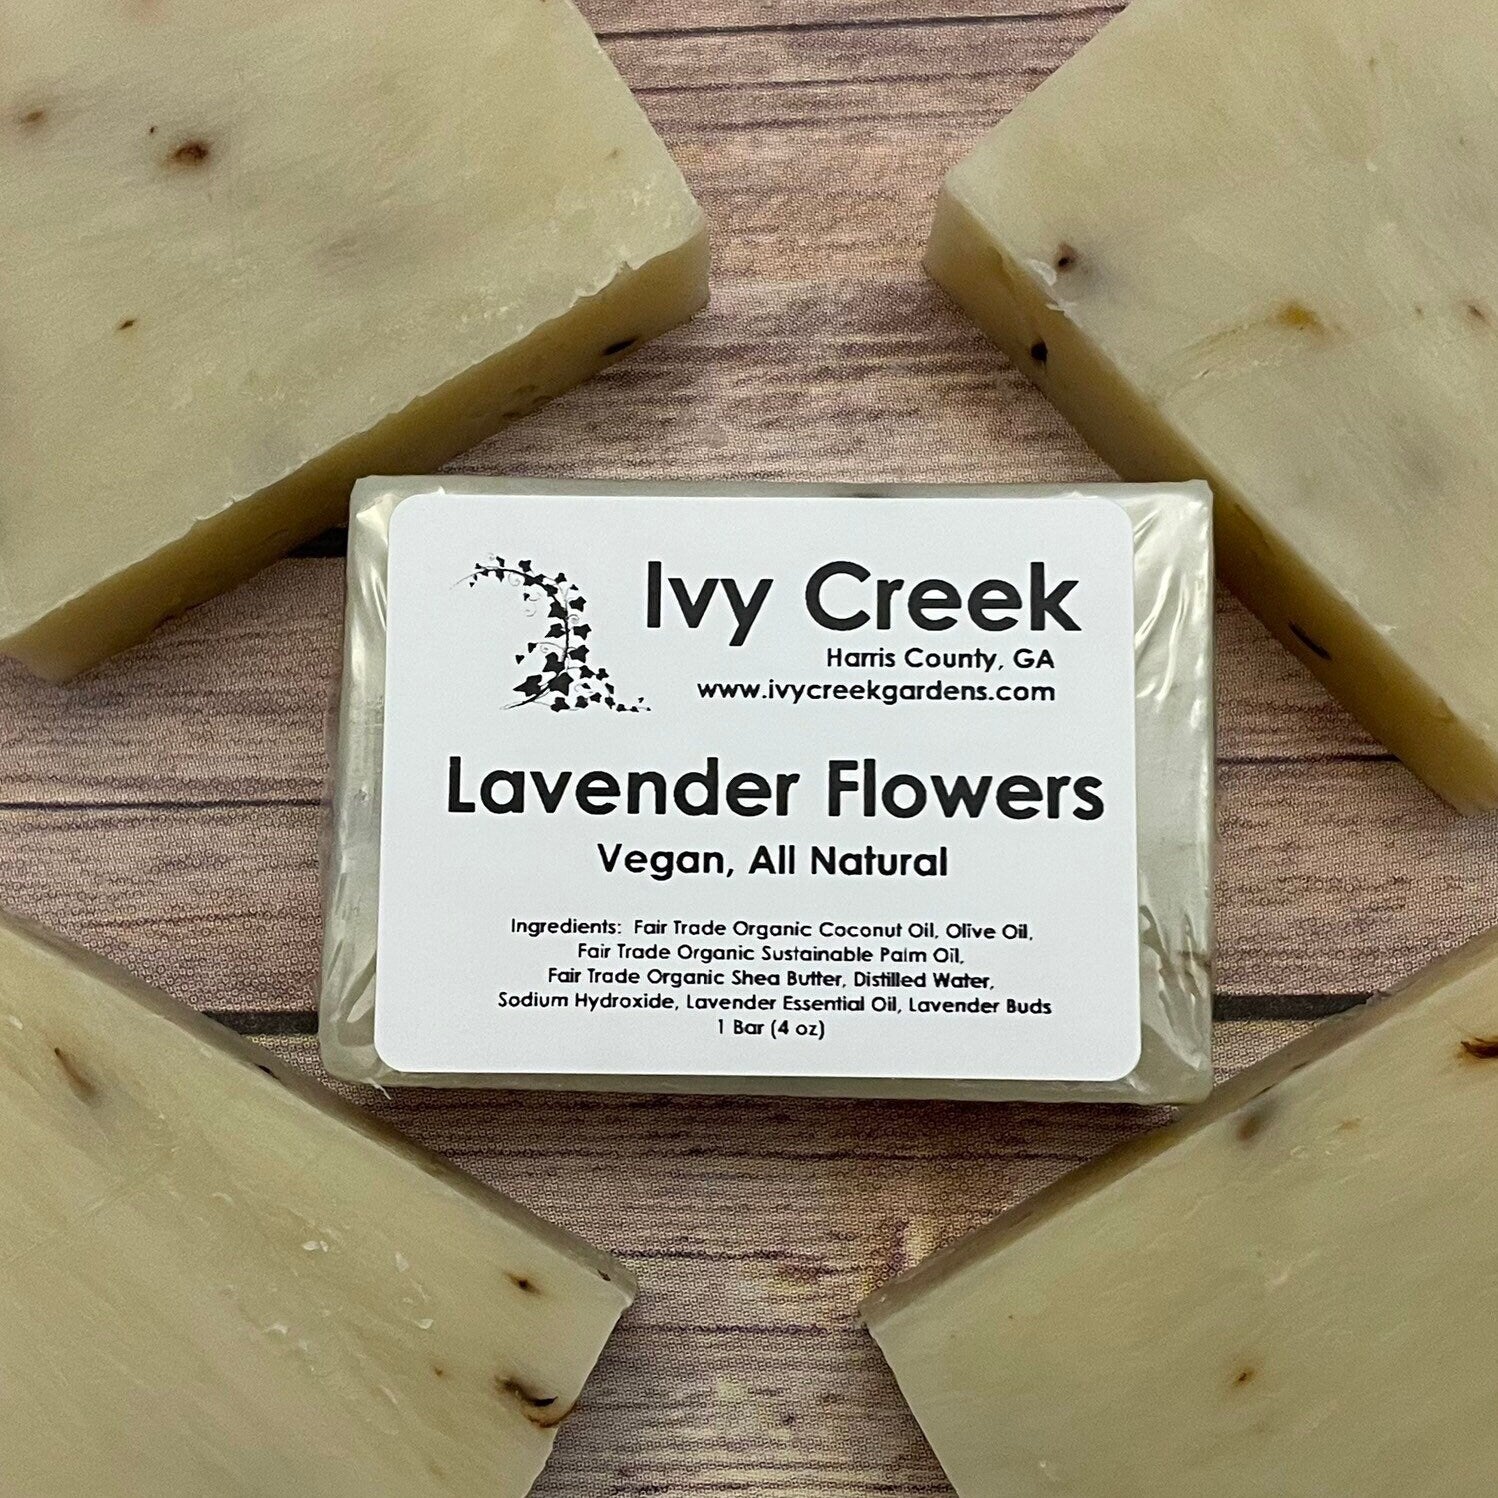 Lavender Flowers Vegan Soap, Vegan Soap, Natural Soap, Holistic Soap, Gifts for Her, Gifts for Mom, Fair Trade Soap